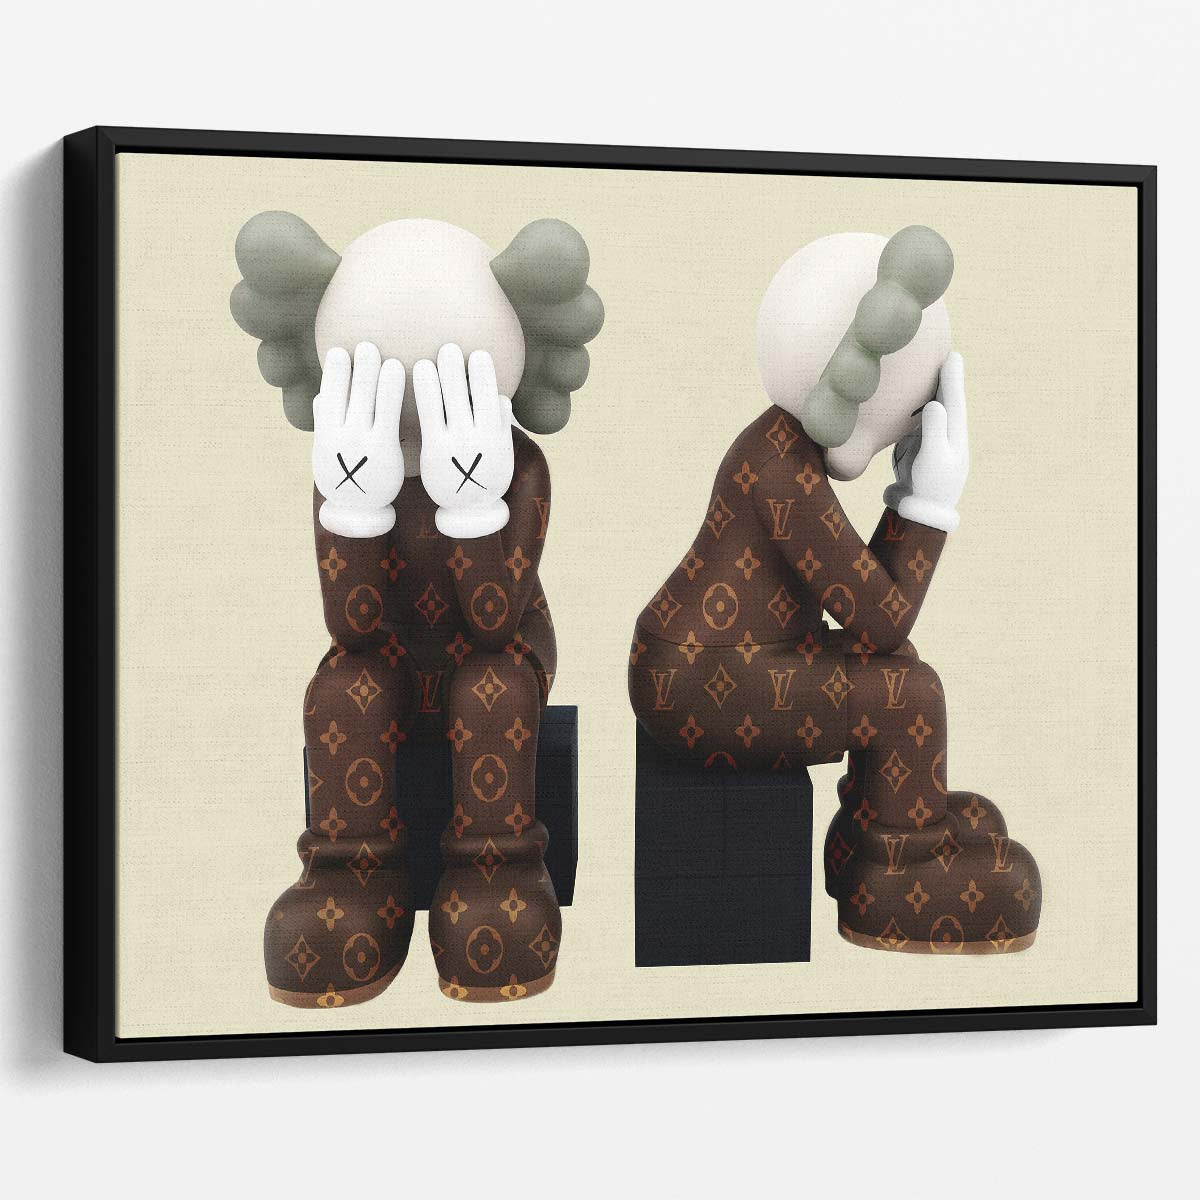 Kaws in Louis Vuitton Skin Wall Art by Luxuriance Designs. Made in USA.